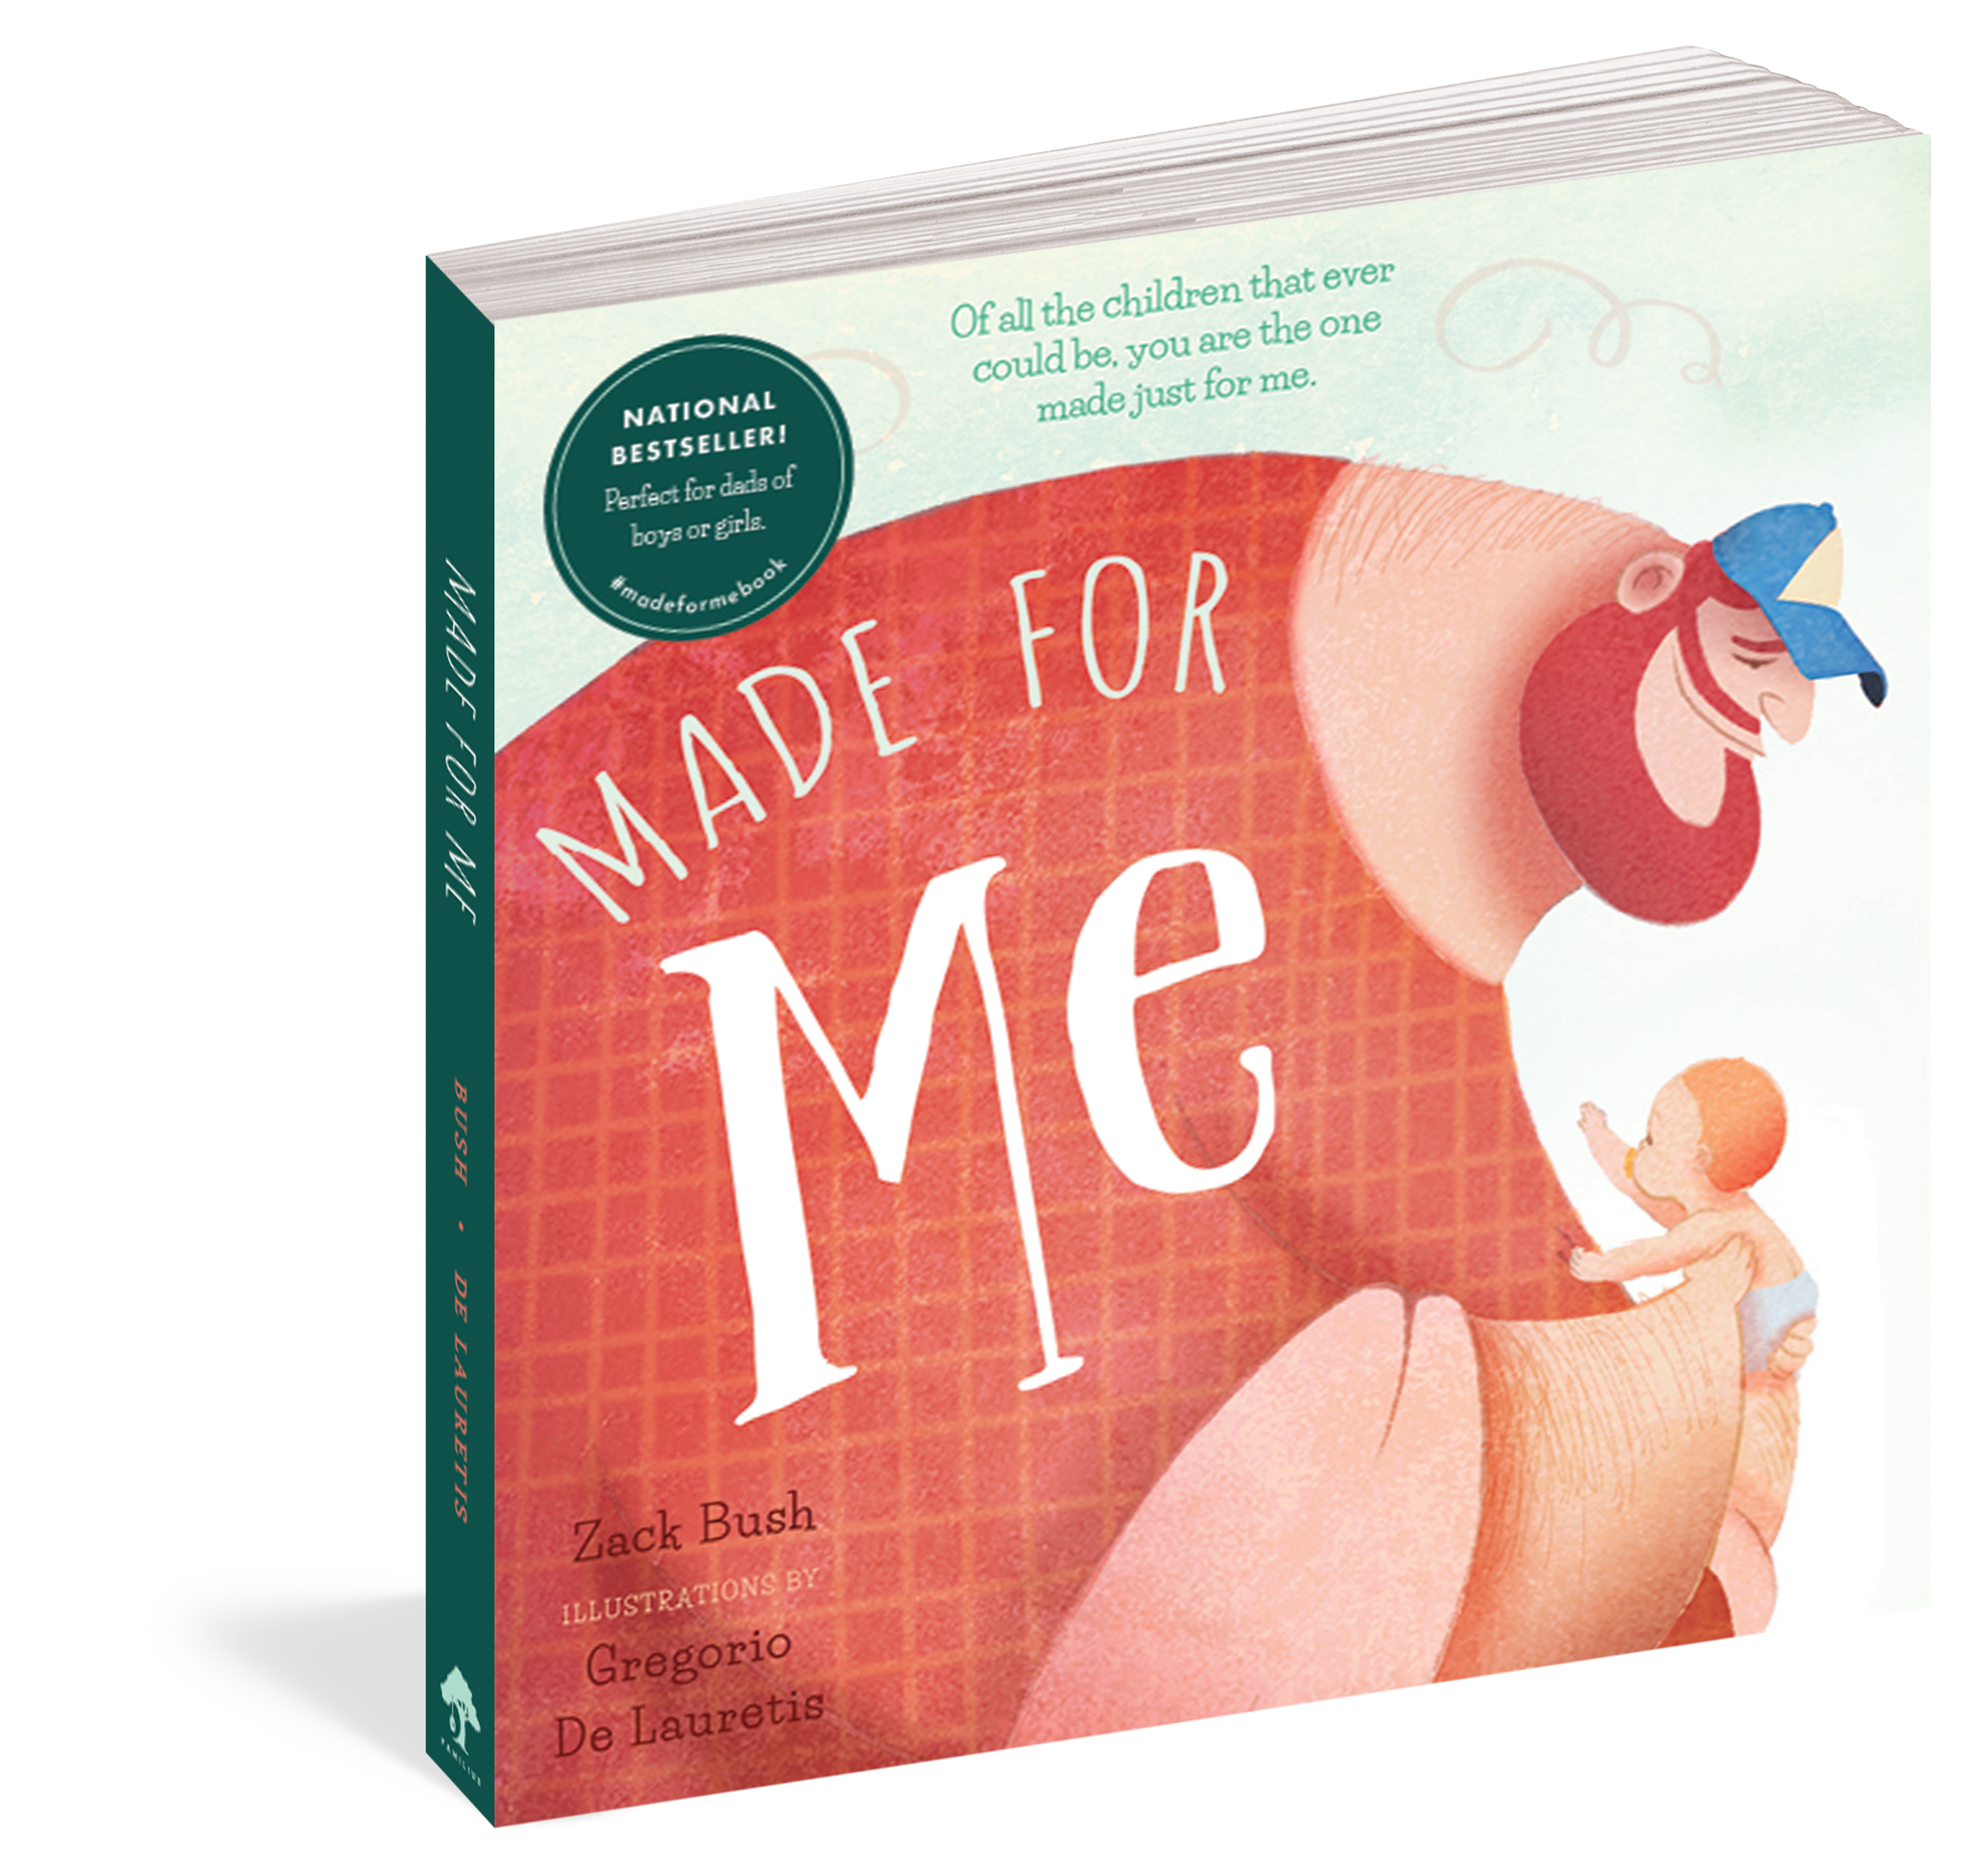 Made for Me Book